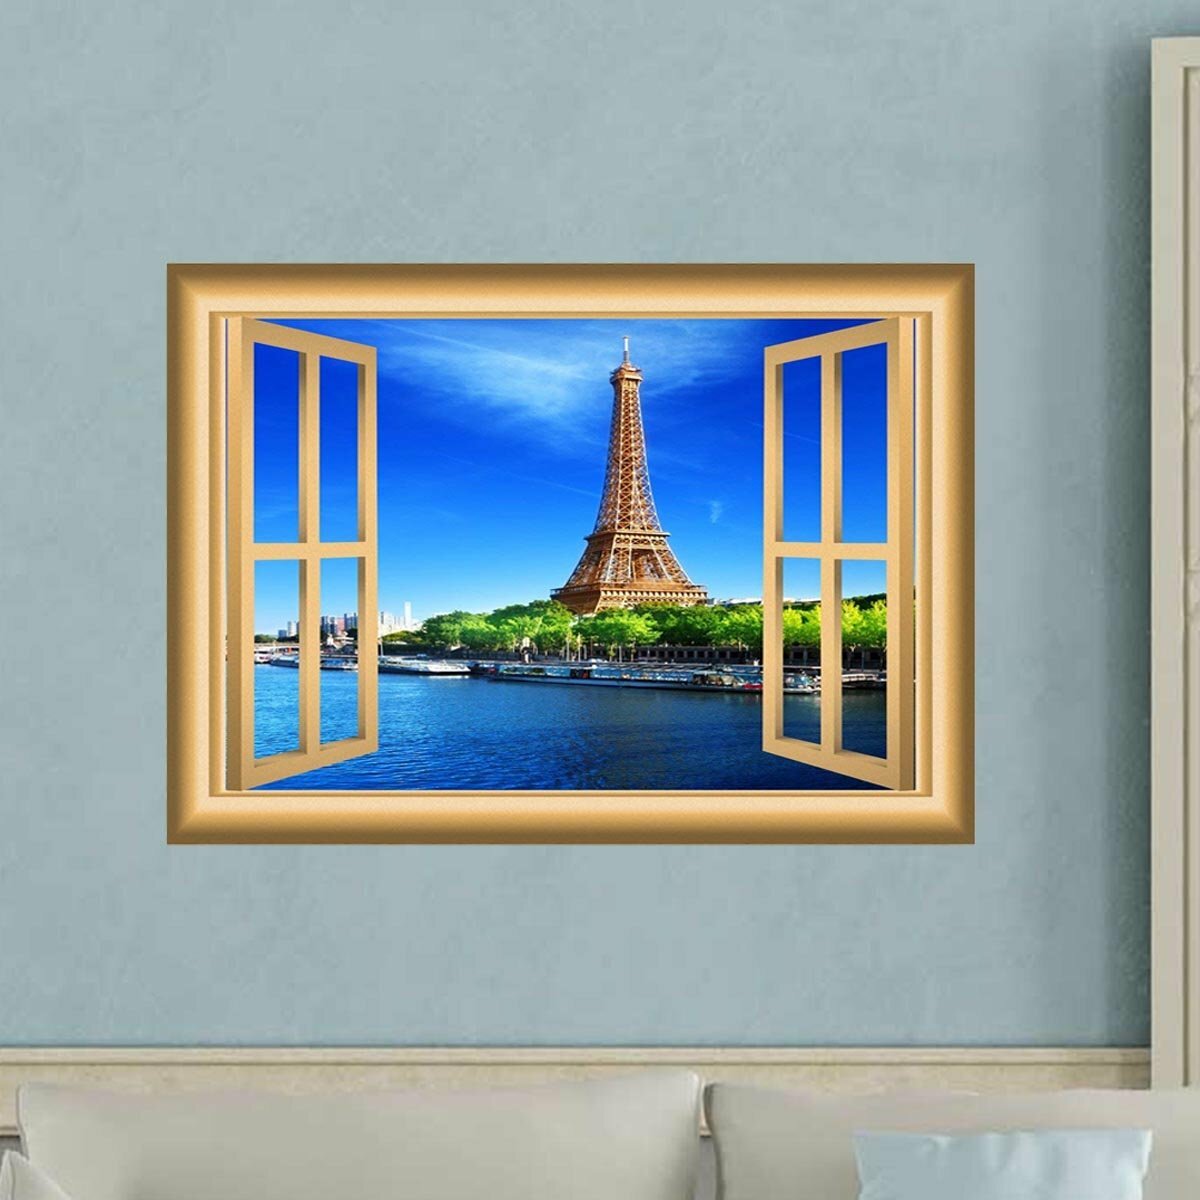 ufengke Girl Bicycle Wall Stickers Flowers Eiffel Tower Wall Decals Mural for Kids Bedroom Living Room